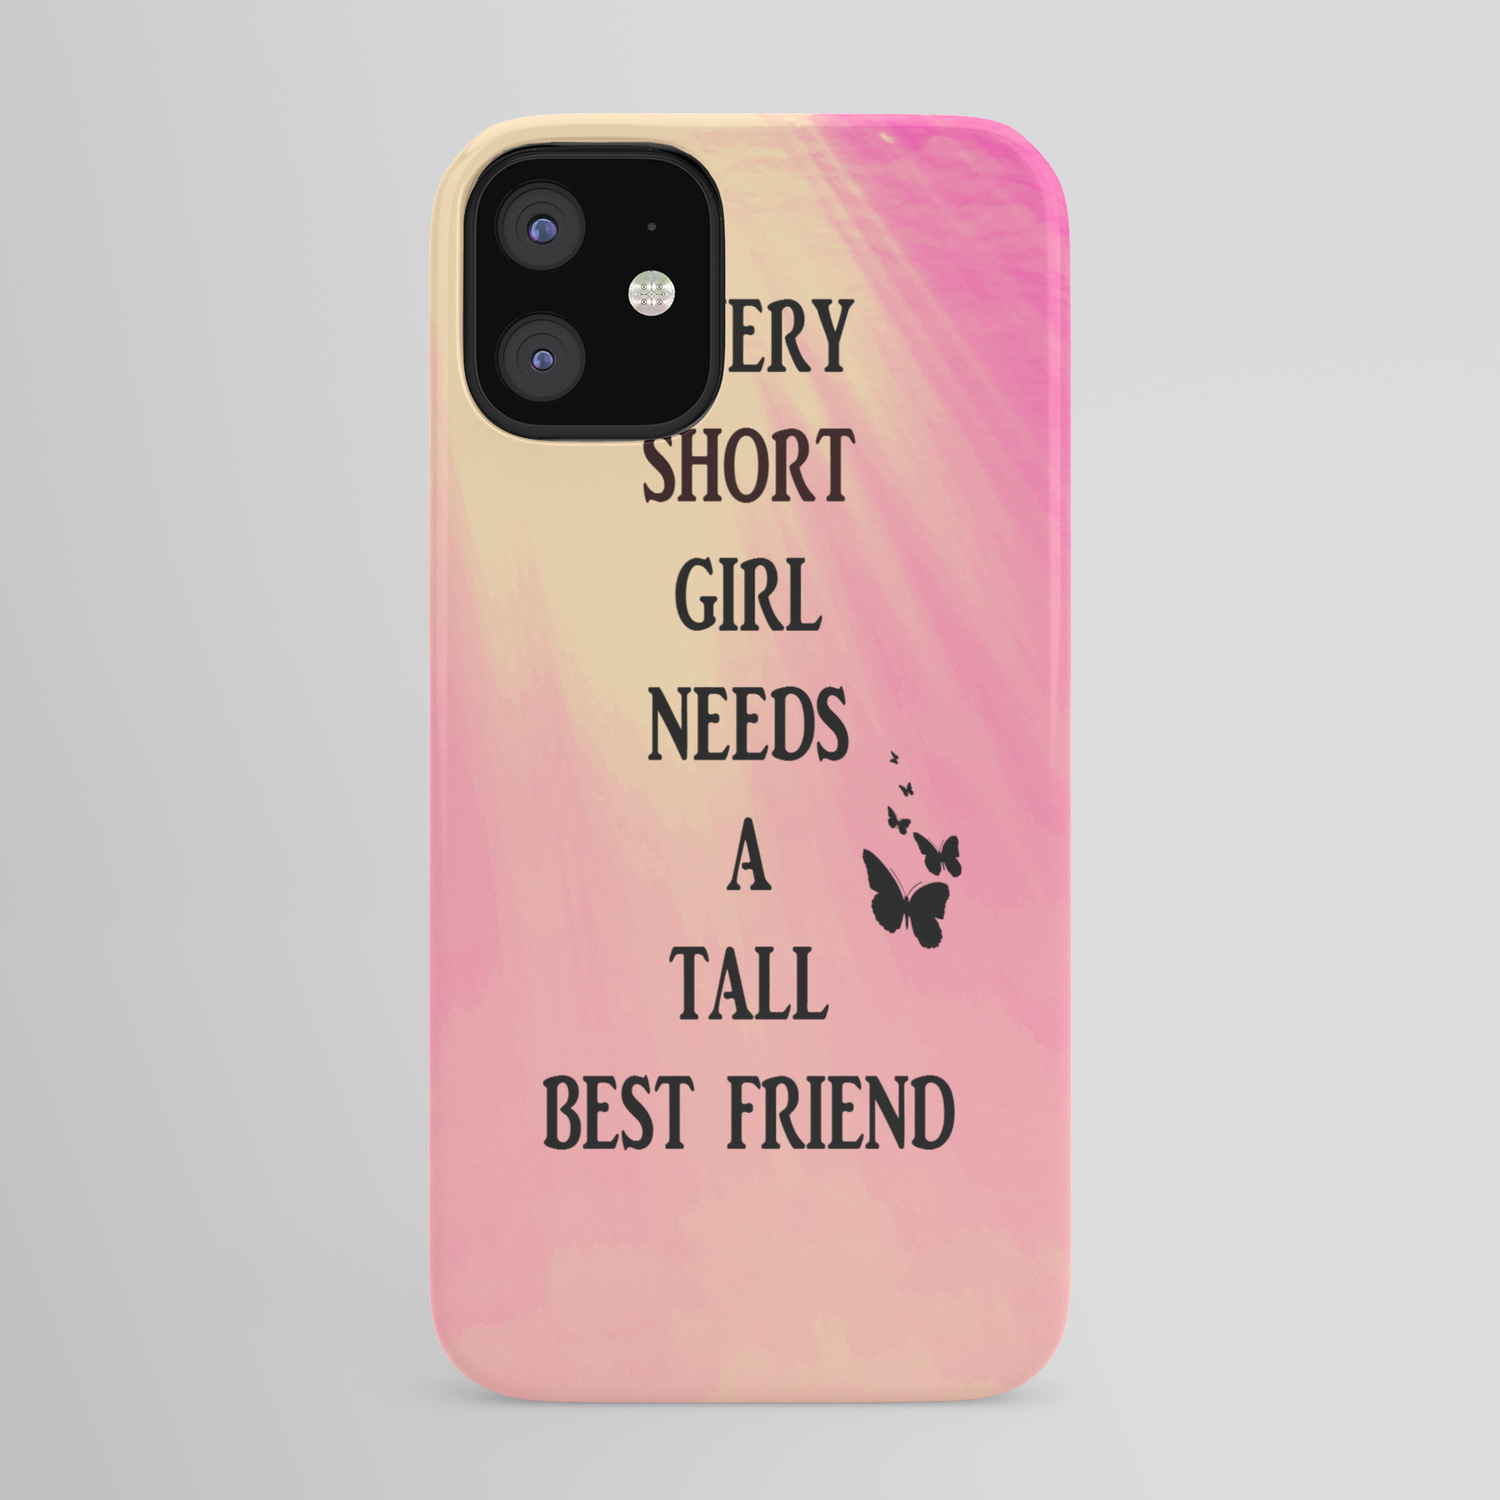 Short Girls Need Tall Best Friends Iphone Case By Tada2 Society6